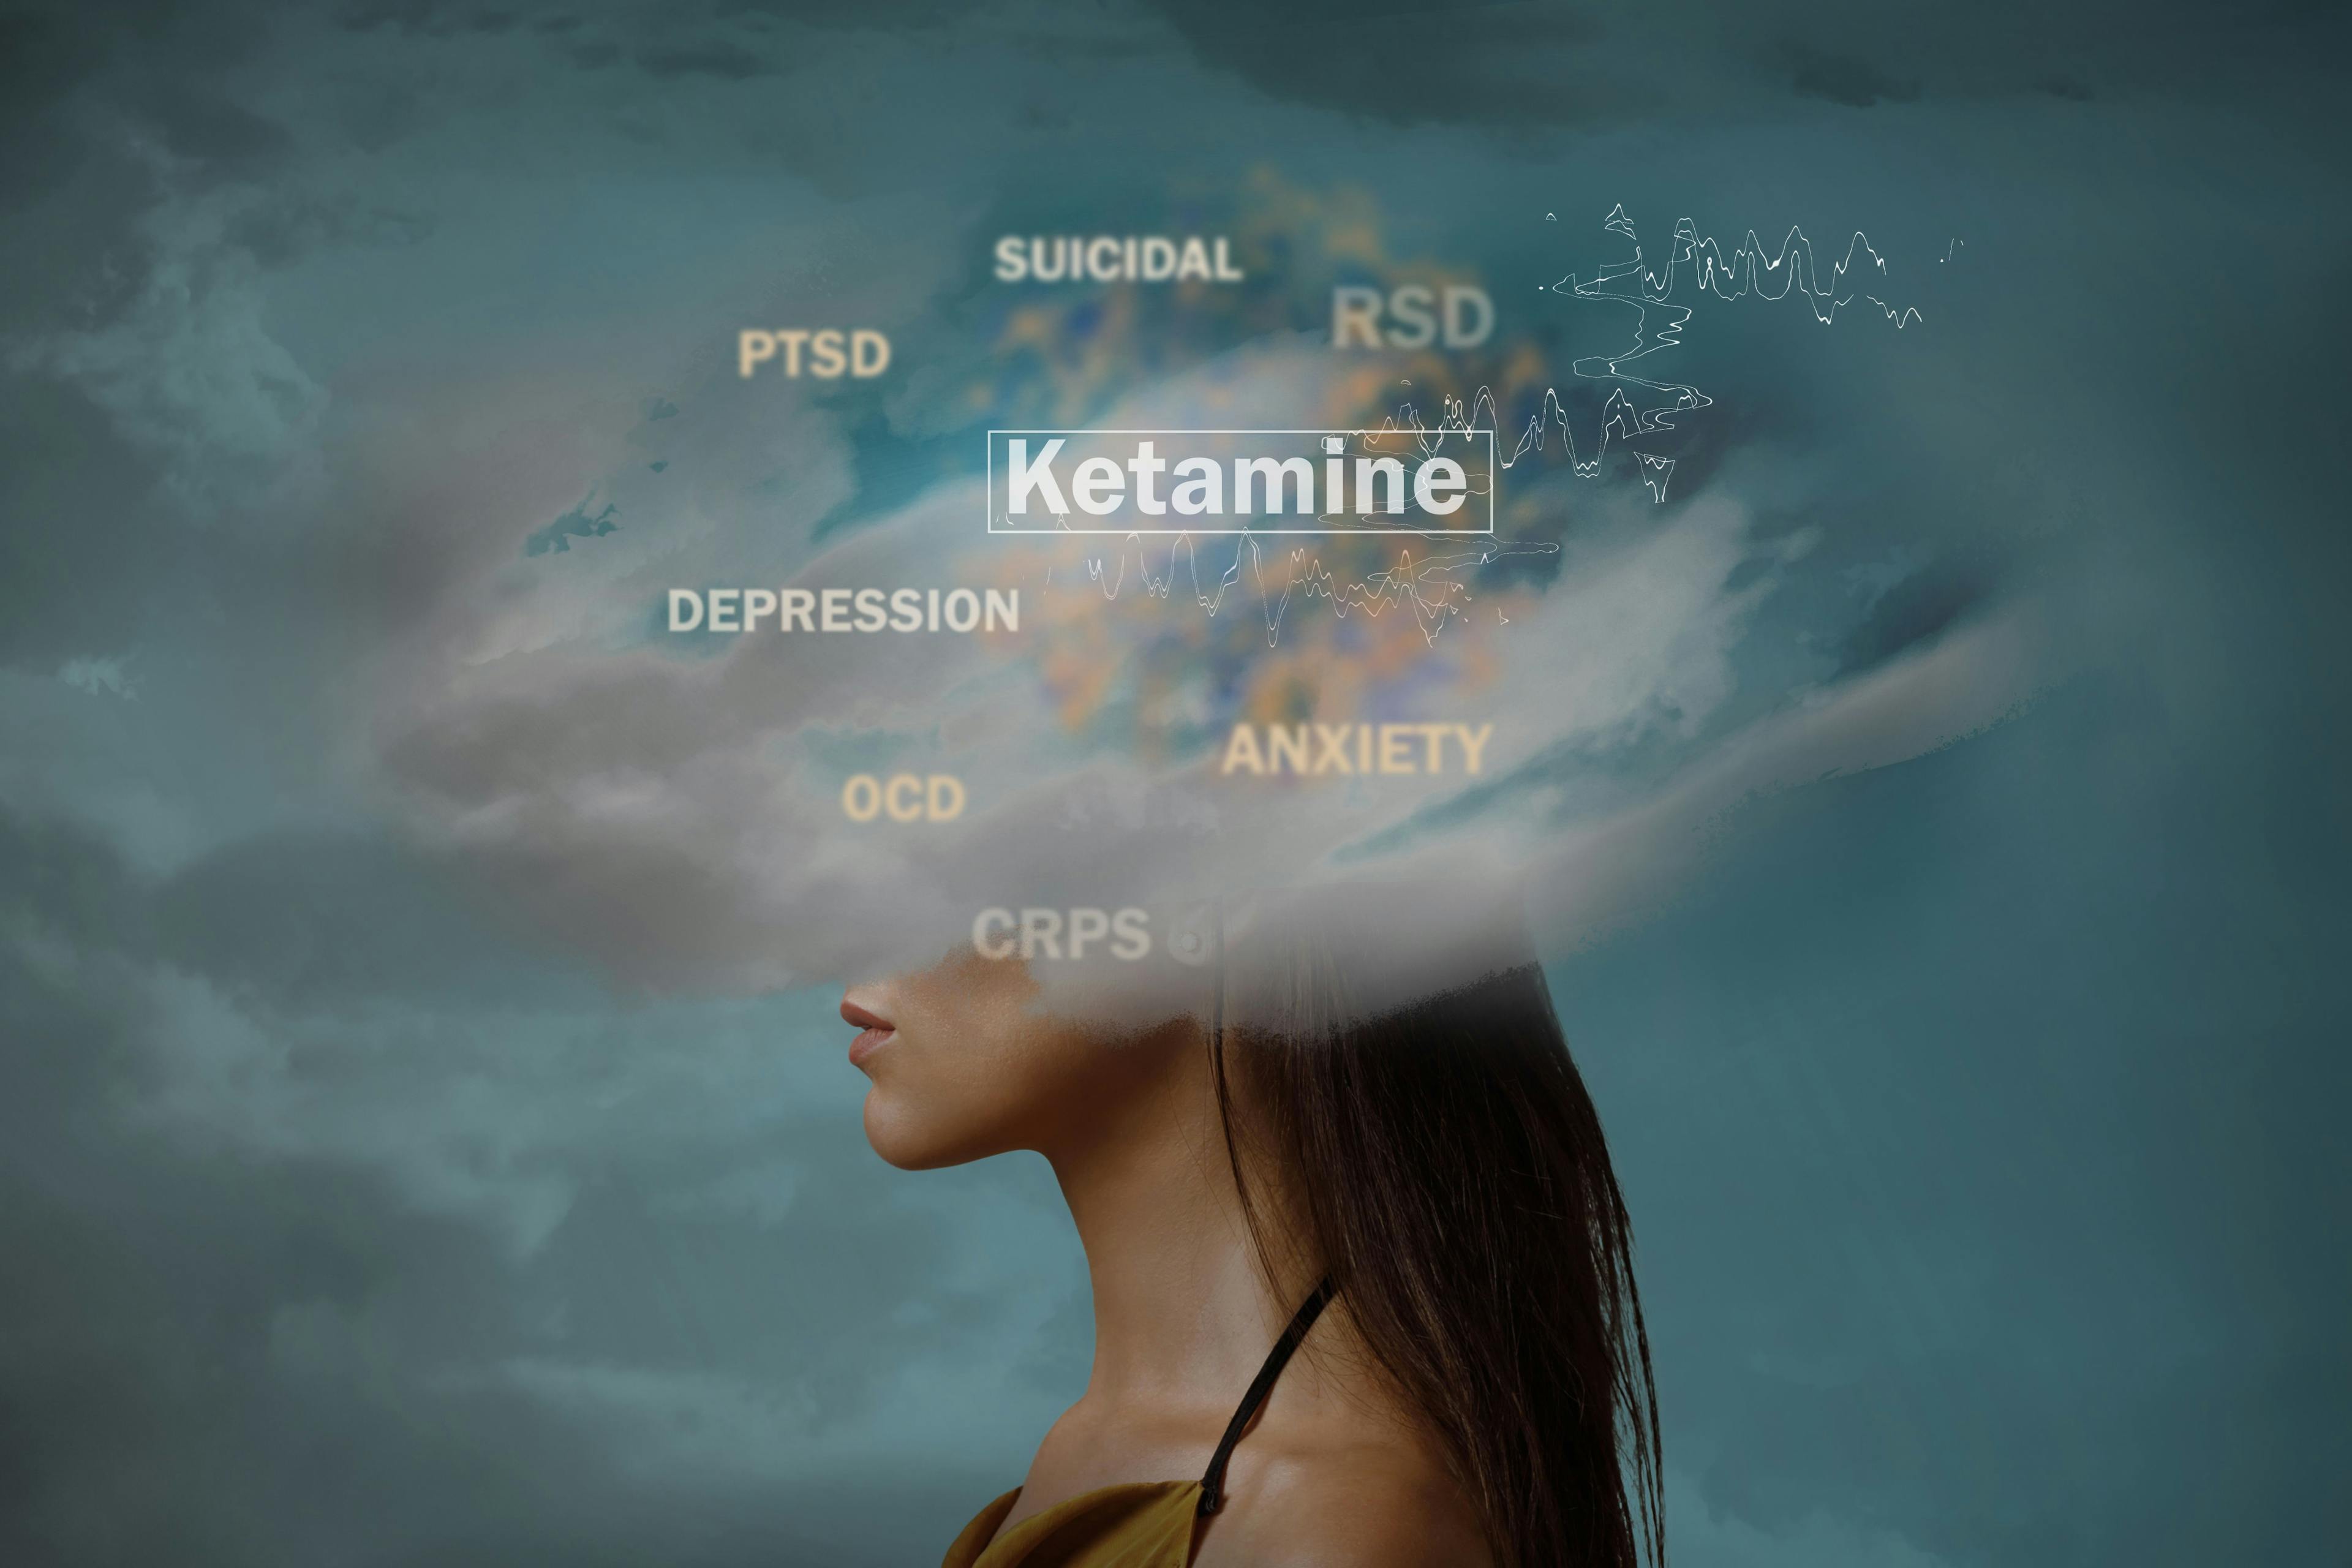 Ketamine for anxiety? Researchers performed a systematic review and meta-analysis of ketamine’s anxiolytic effects.